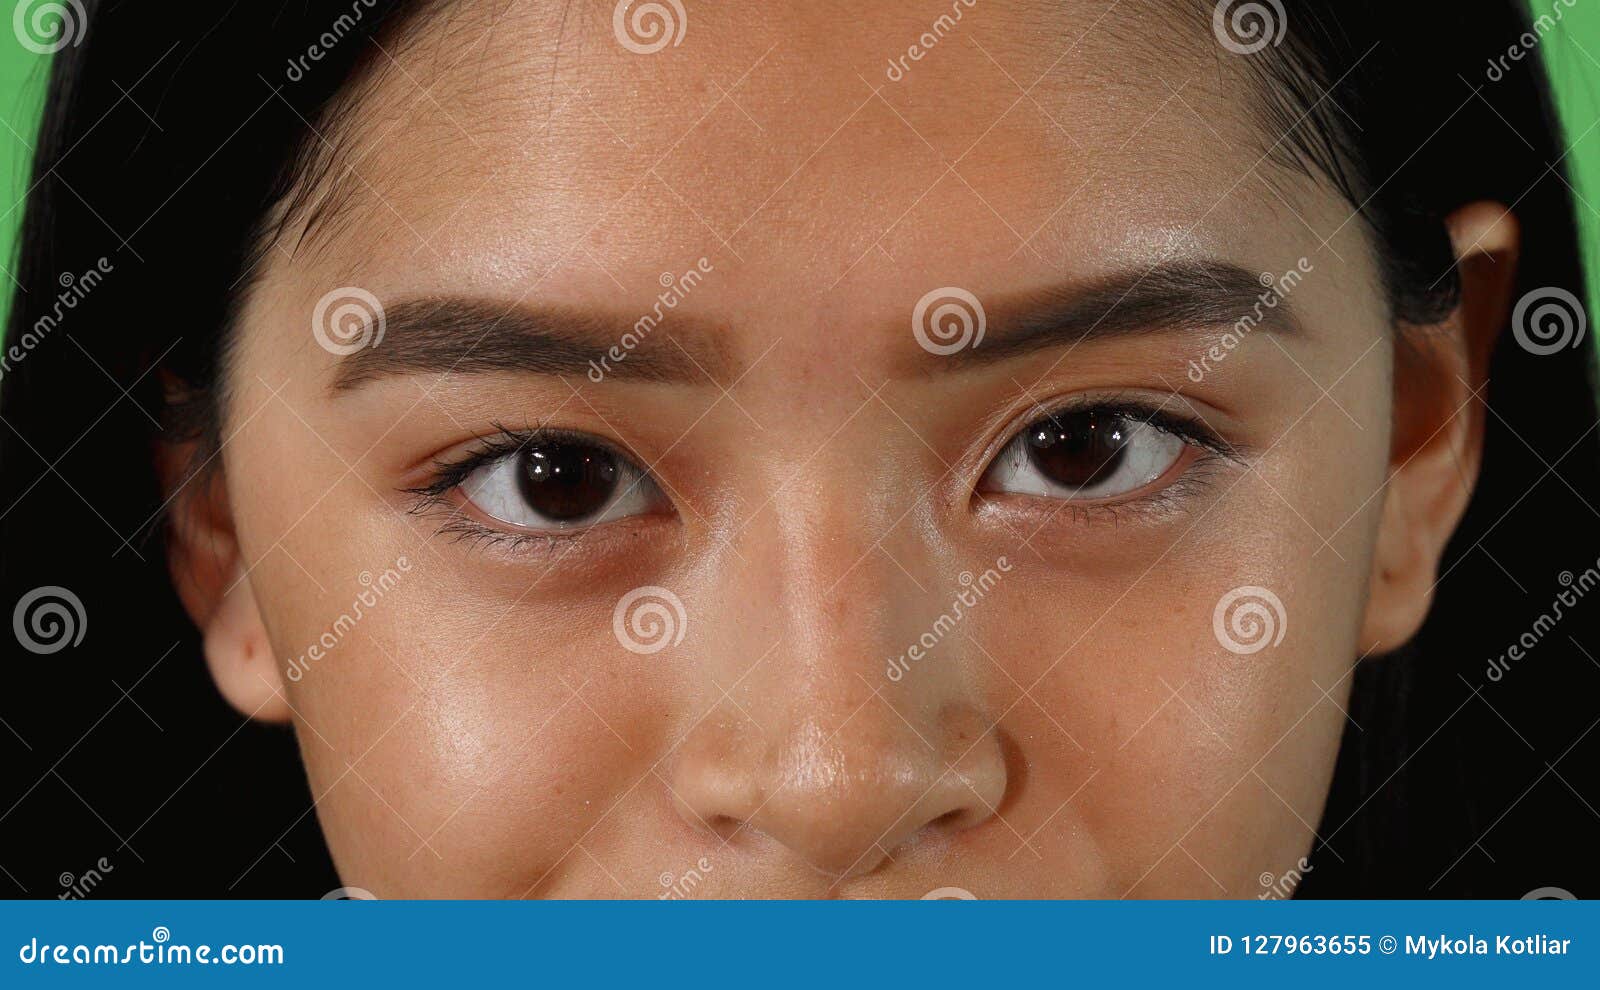 Asian woman with green eyes